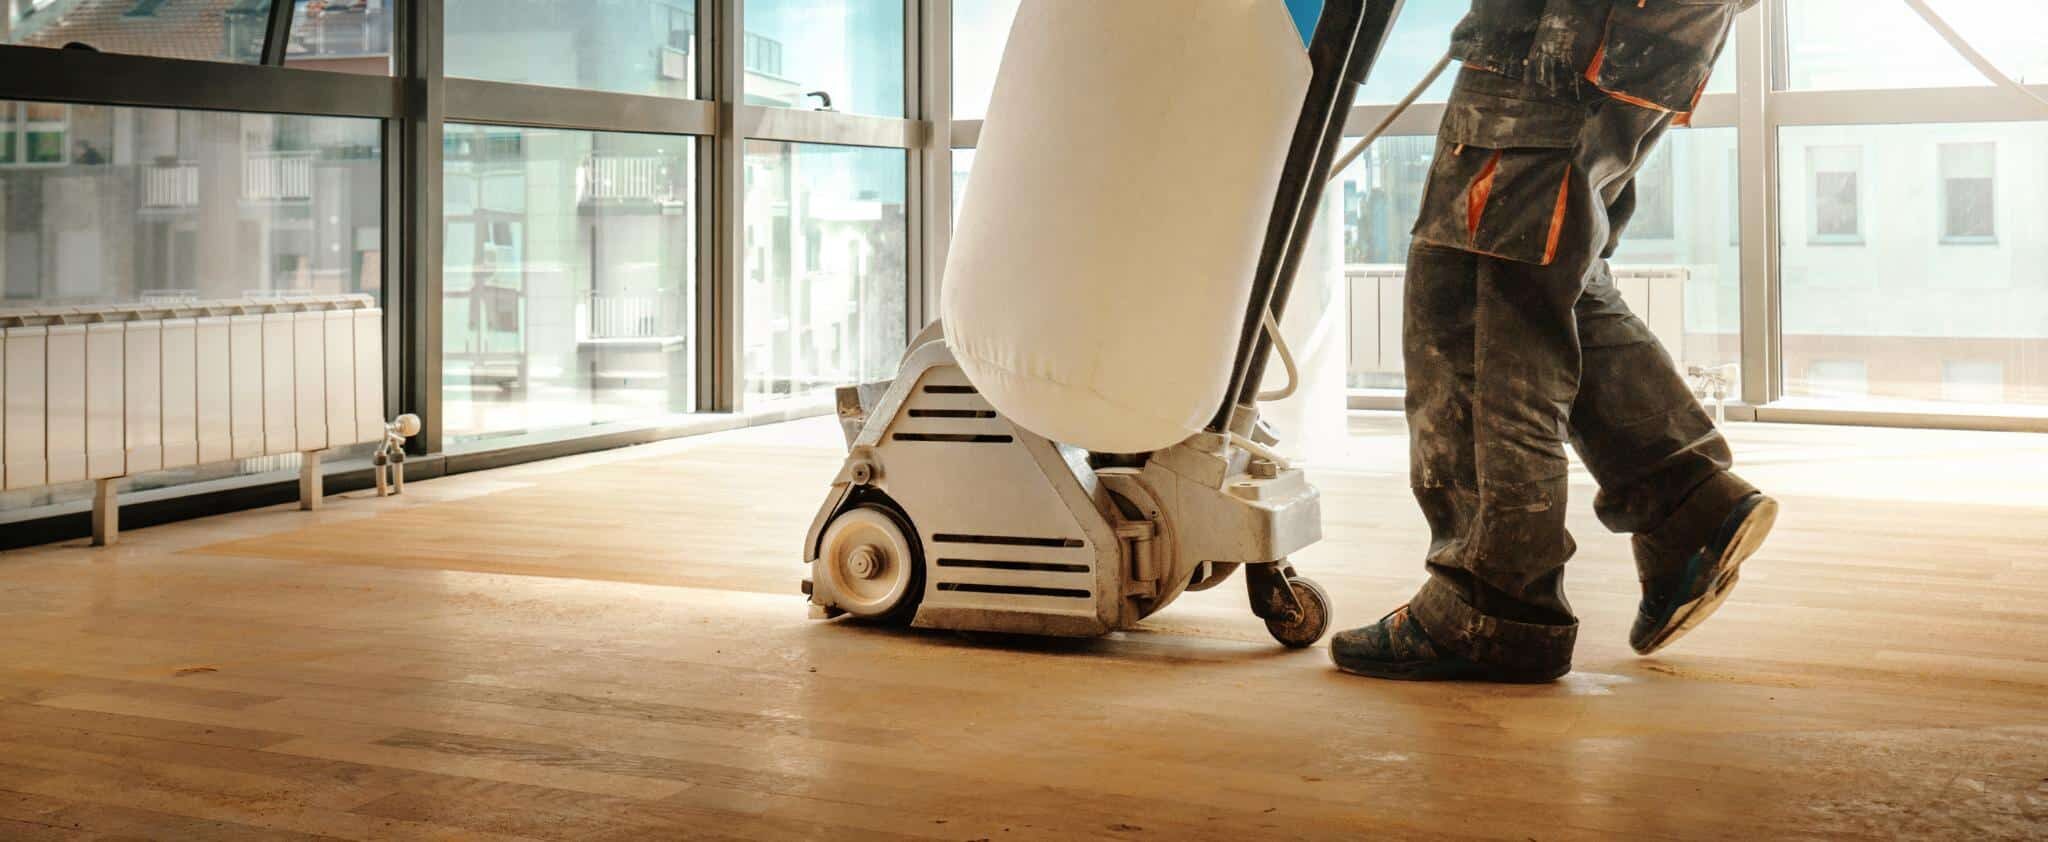 In East Sheen, Mr Sander® utilize a Bona Scorpion drum sander, boasting dimensions of 200 mm and an effect of 1.5 kW. Powered by 240 V voltage and 50 Hz frequency, it is connected to a dust extraction system with a HEPA filter for cleanliness and efficiency. 